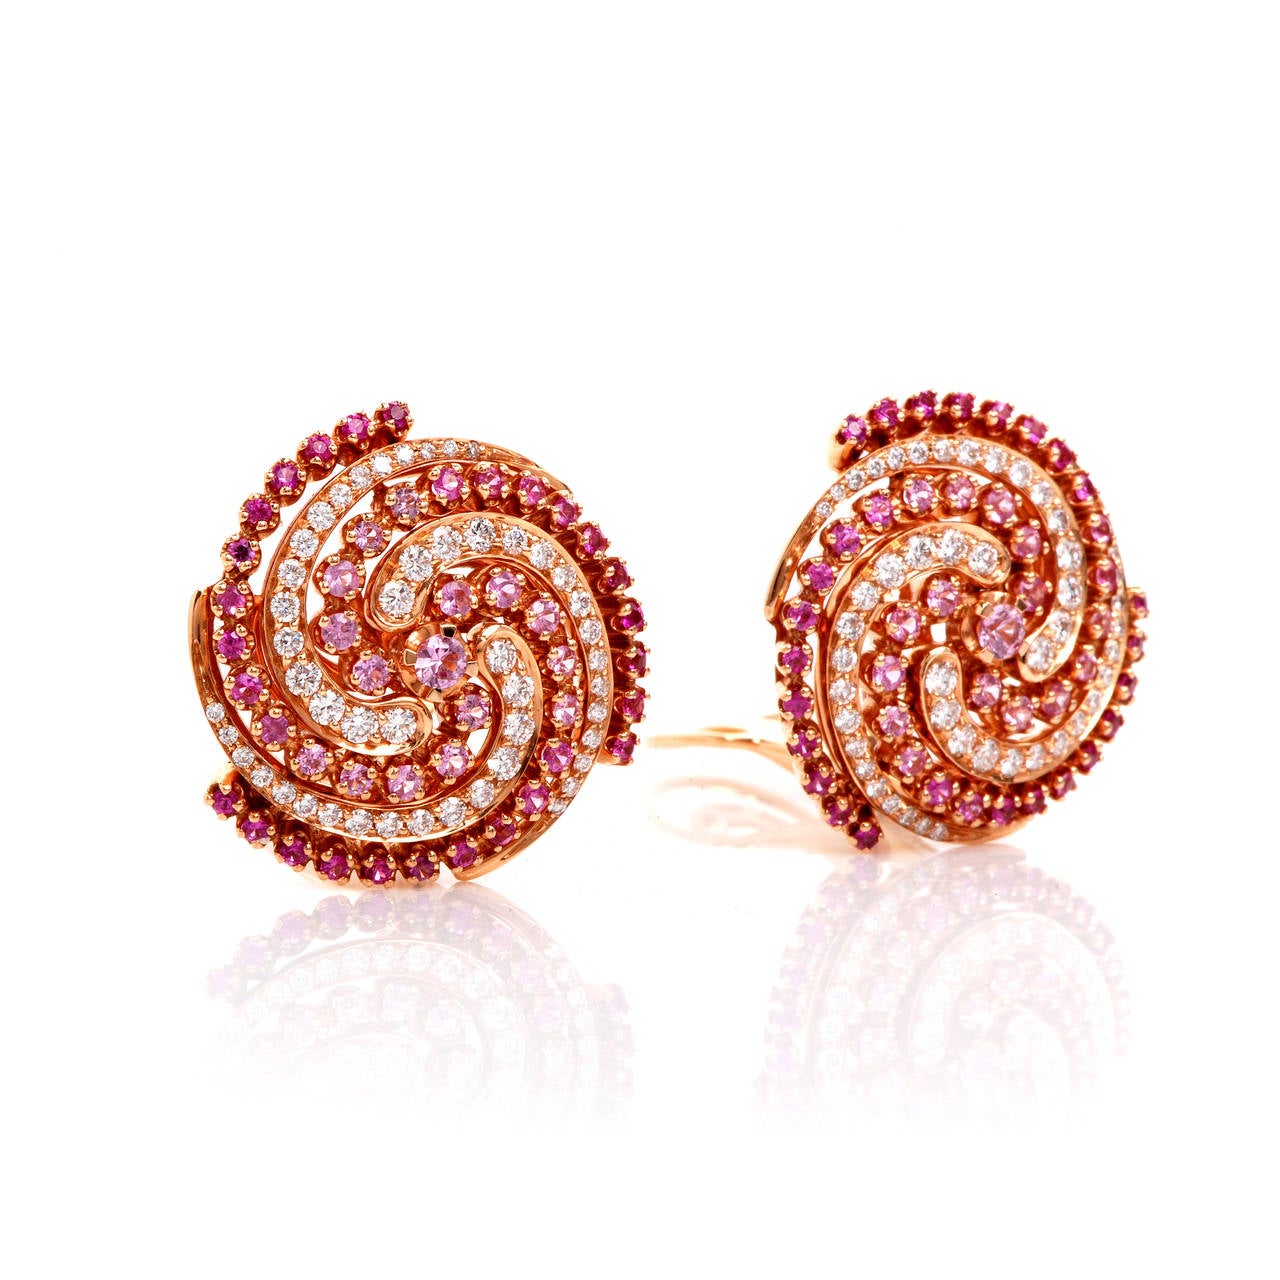 These stunning and very unique Garavelli designer swirl clipback earrings are crafted in solid 18K gold. These earrings are accented with some 96 genuine round cut diamonds approx 2.00cttw, F-G color, VVS clarity and some 92 genuine pink sapphires